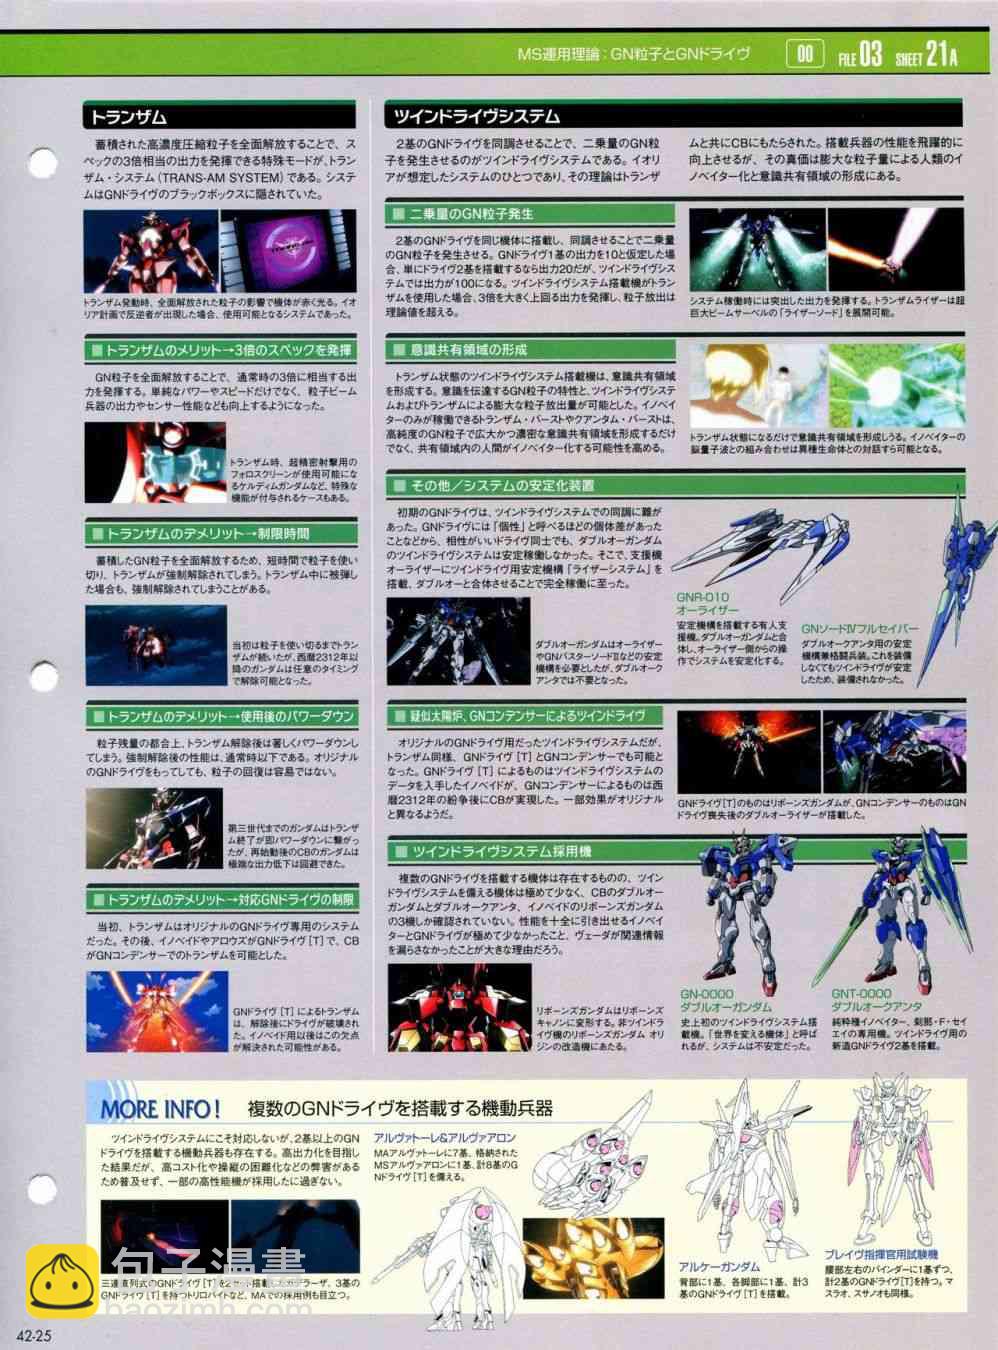 The Official Gundam Perfect File  - 第46-50話(1/4) - 3